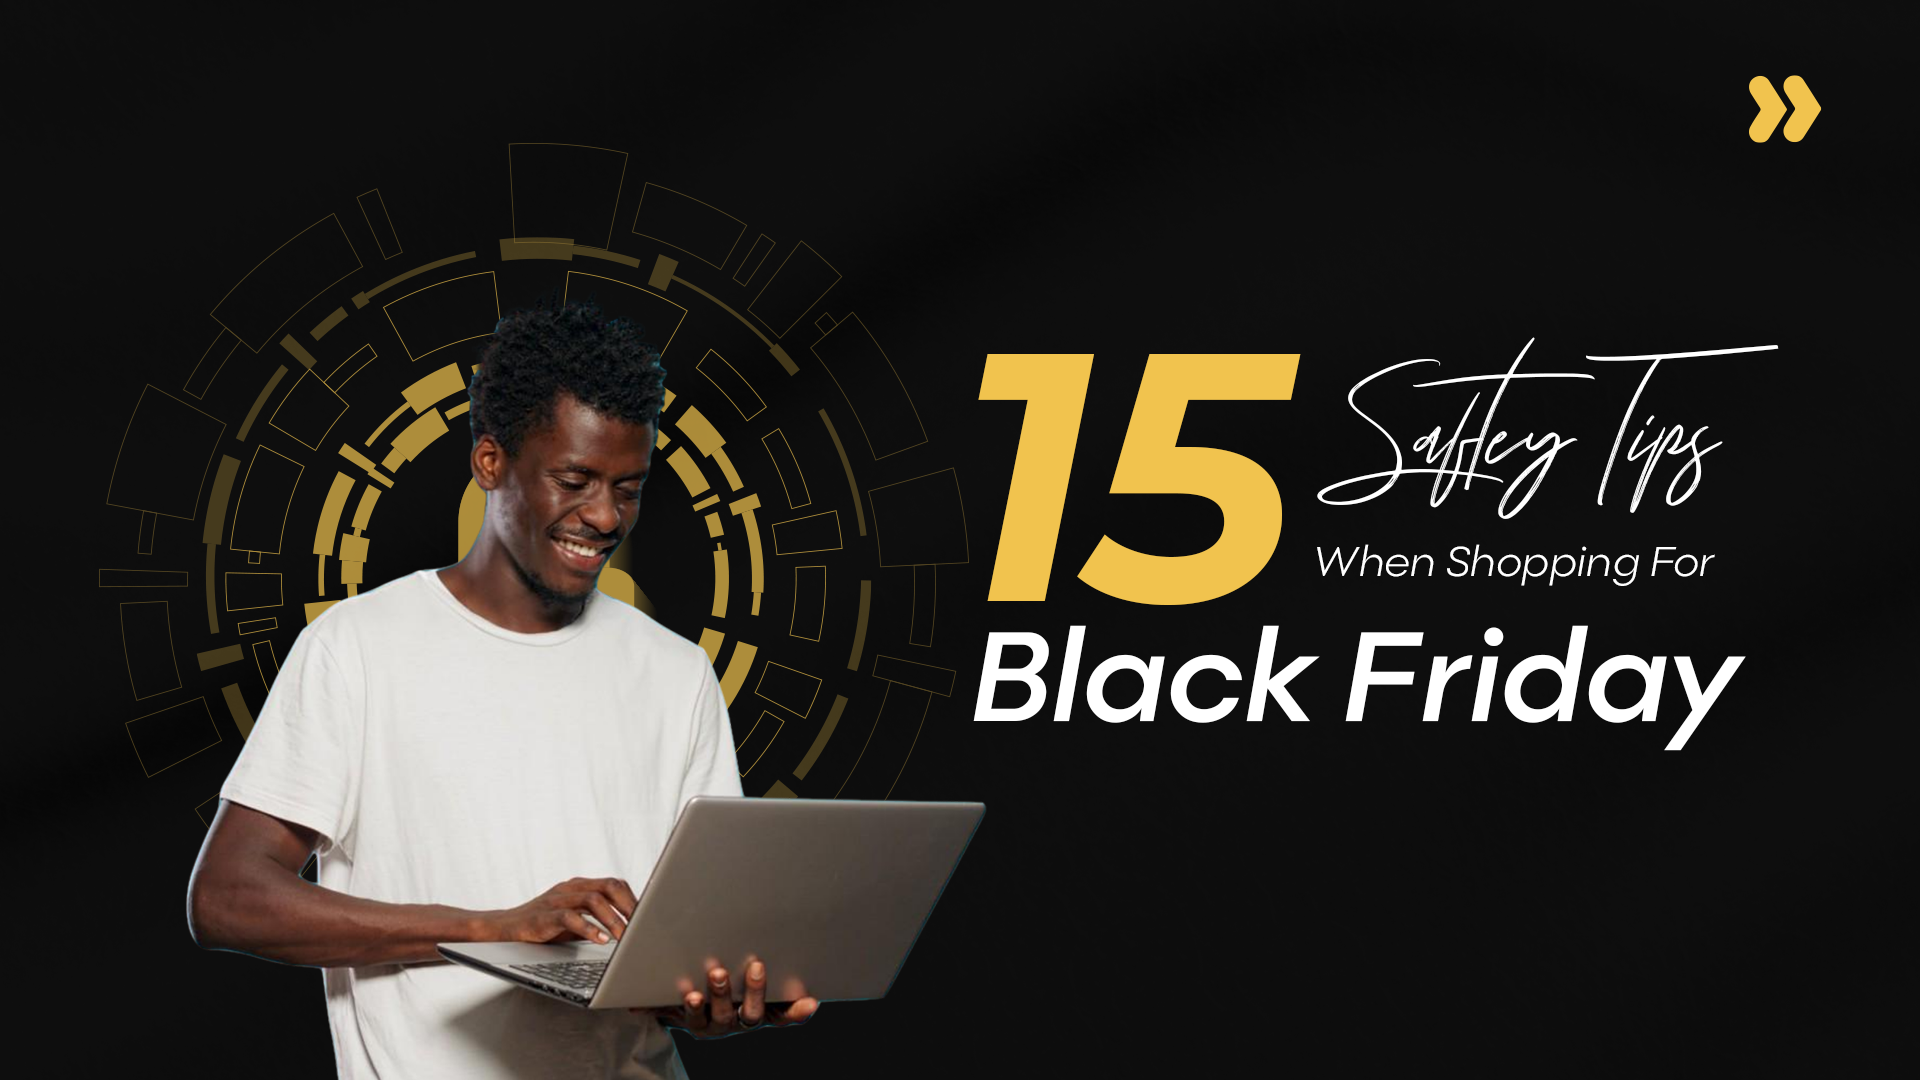 15 Safety Tips When Shopping For Black Friday Deals